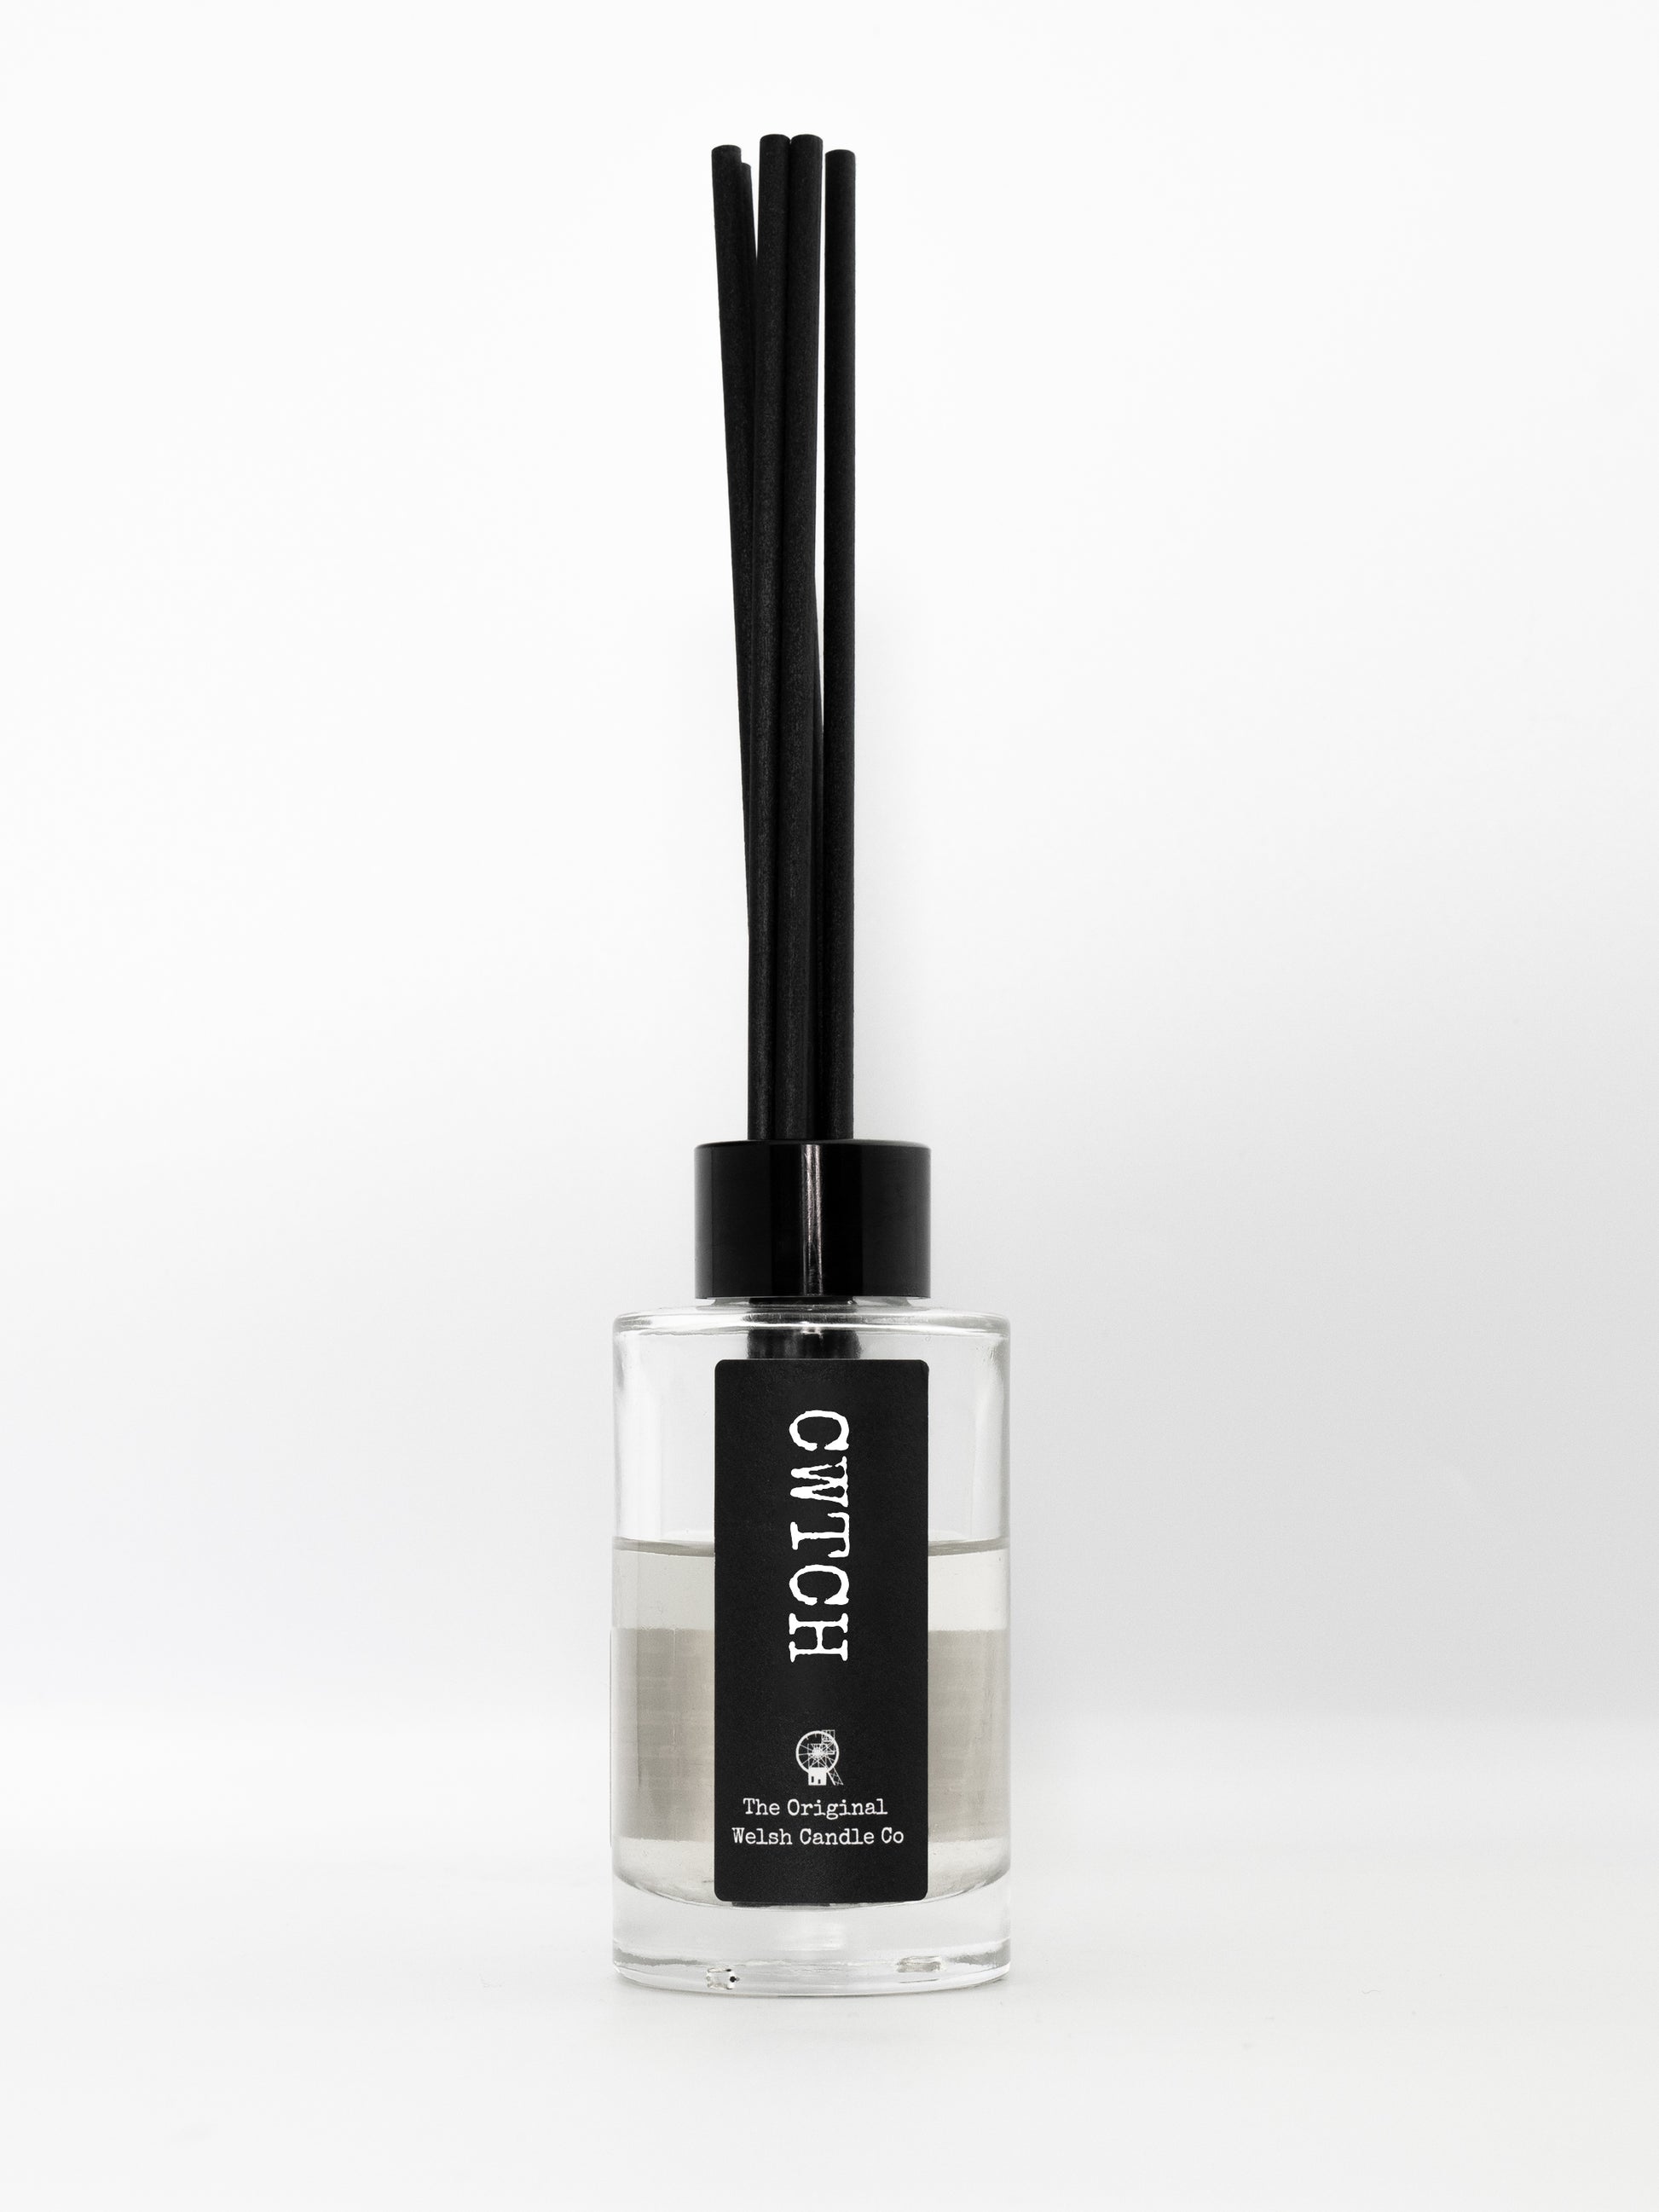 A clear bottle containing natural diffuser scented with rose and oud, has a cwtch label on the front and 7 black diffuser reeds